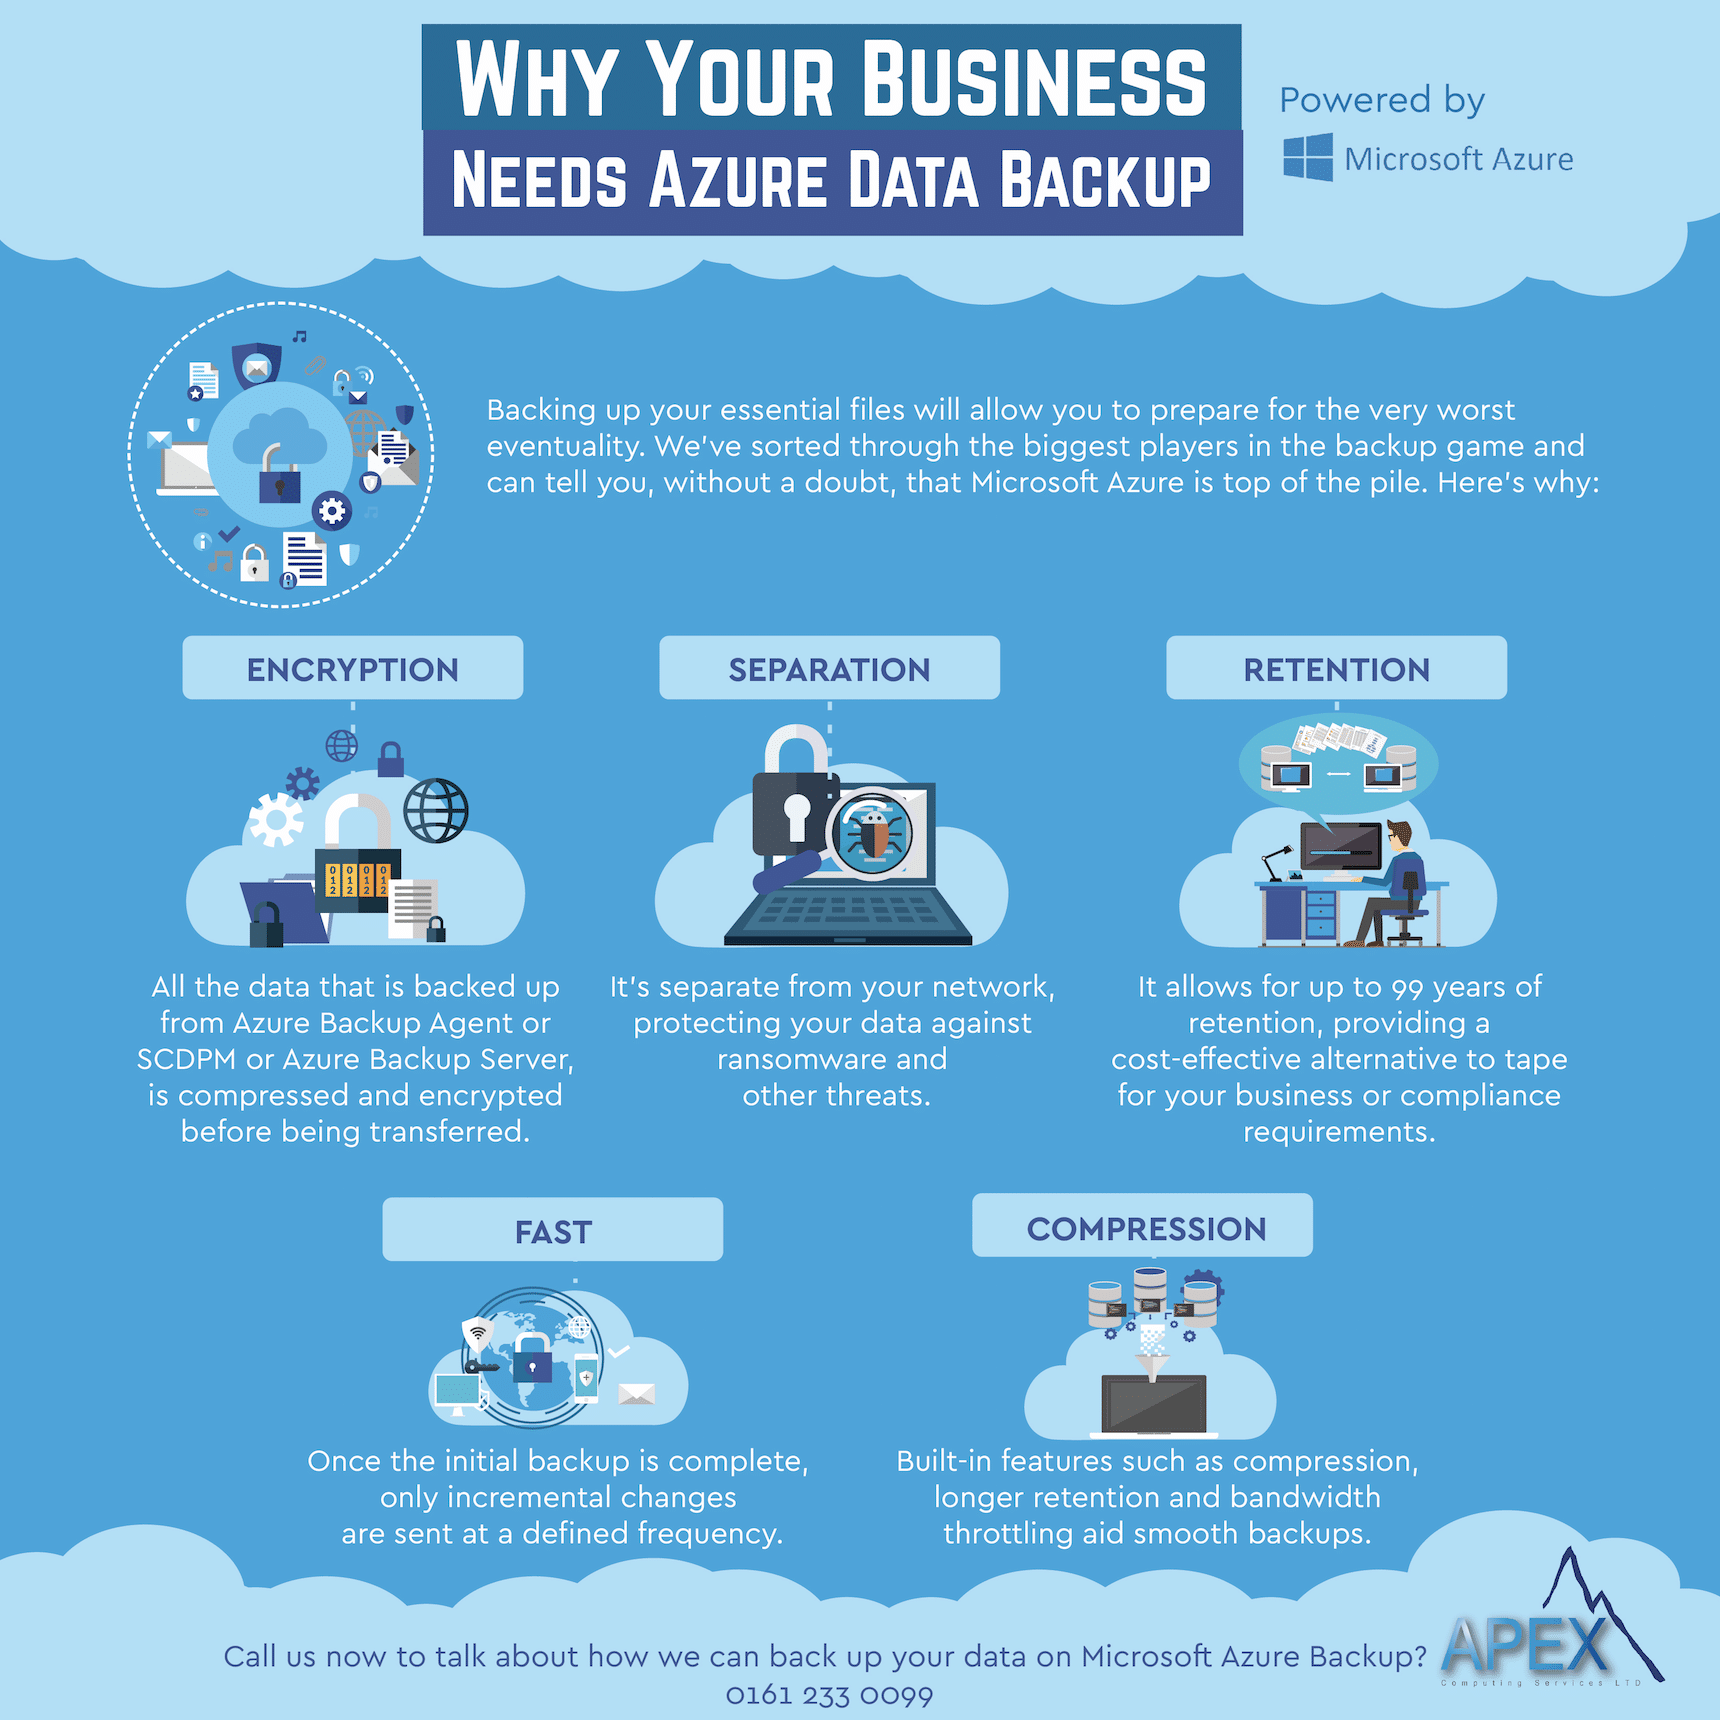 Why Your Business Needs Azure Data Backup?